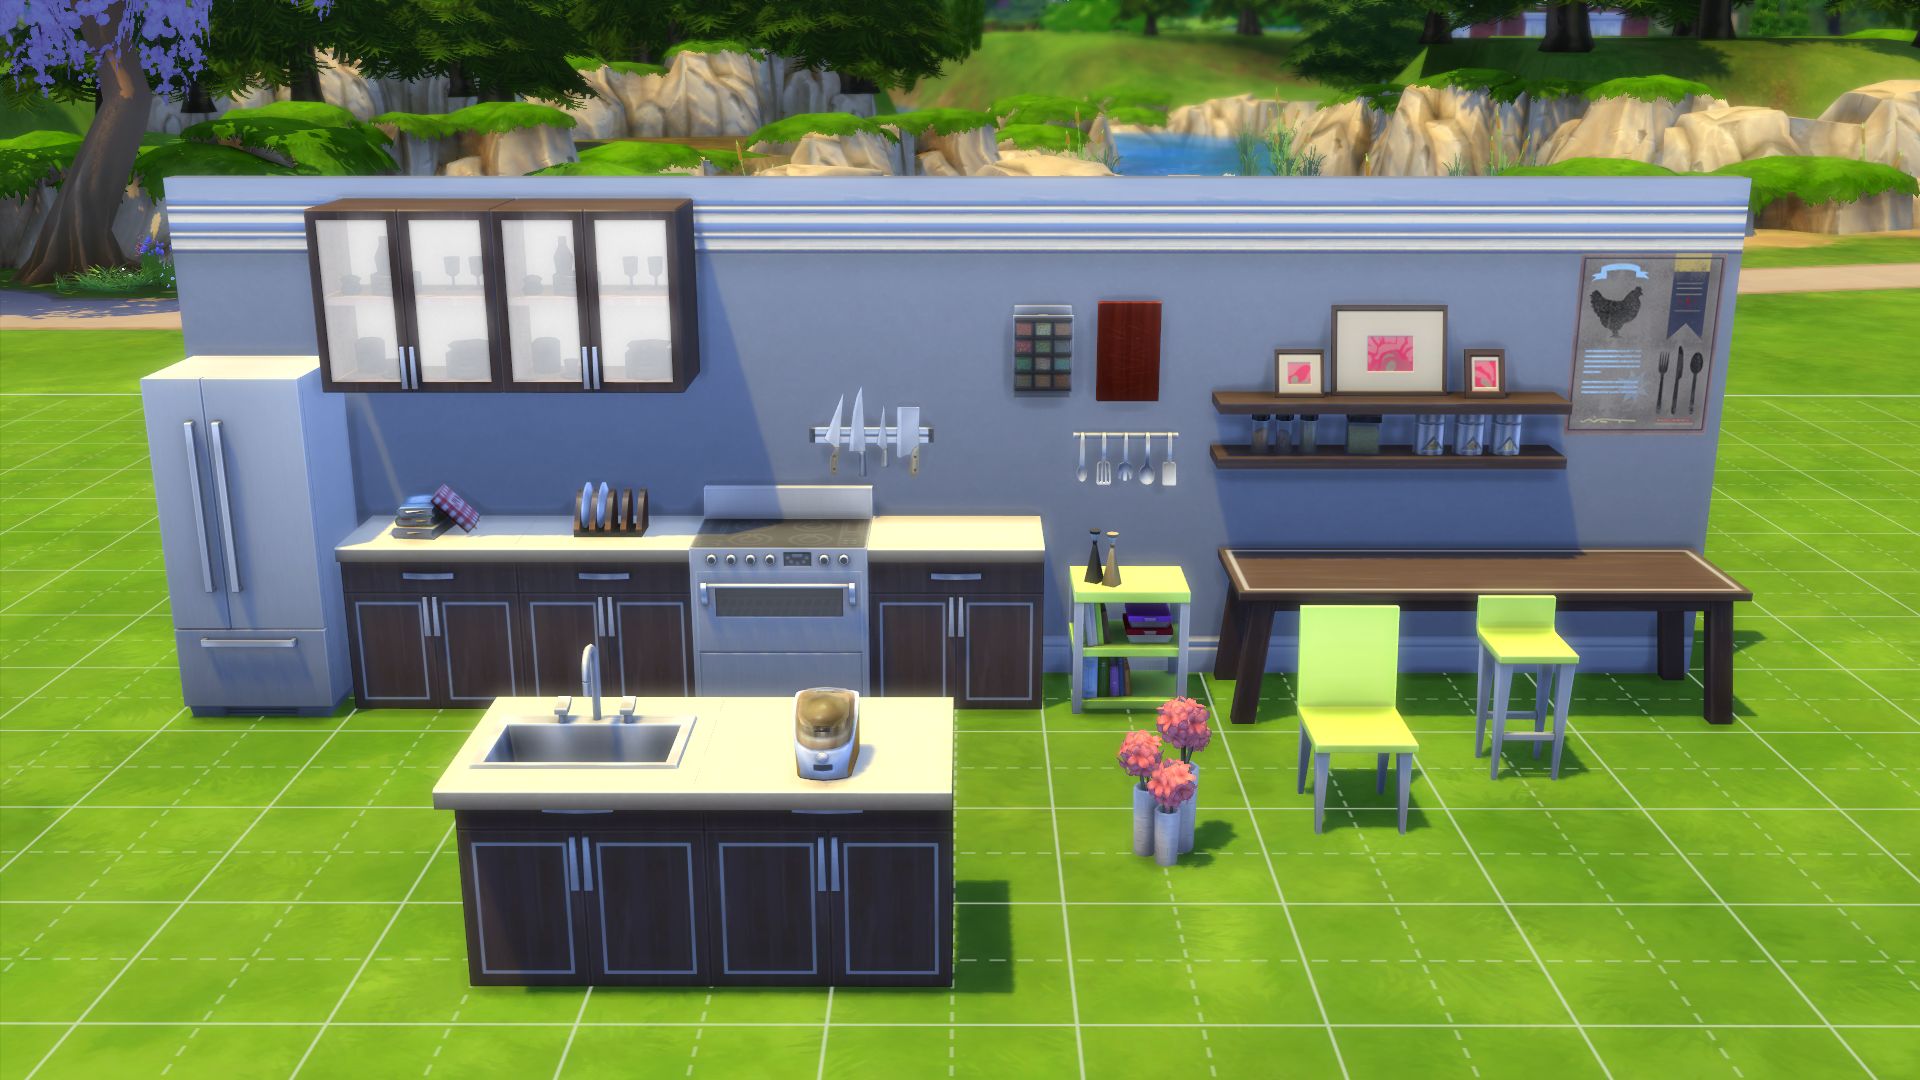 The Sims 4 Cool Kitchen Stuff Pack DLC for PC Game Origin Key Region Free